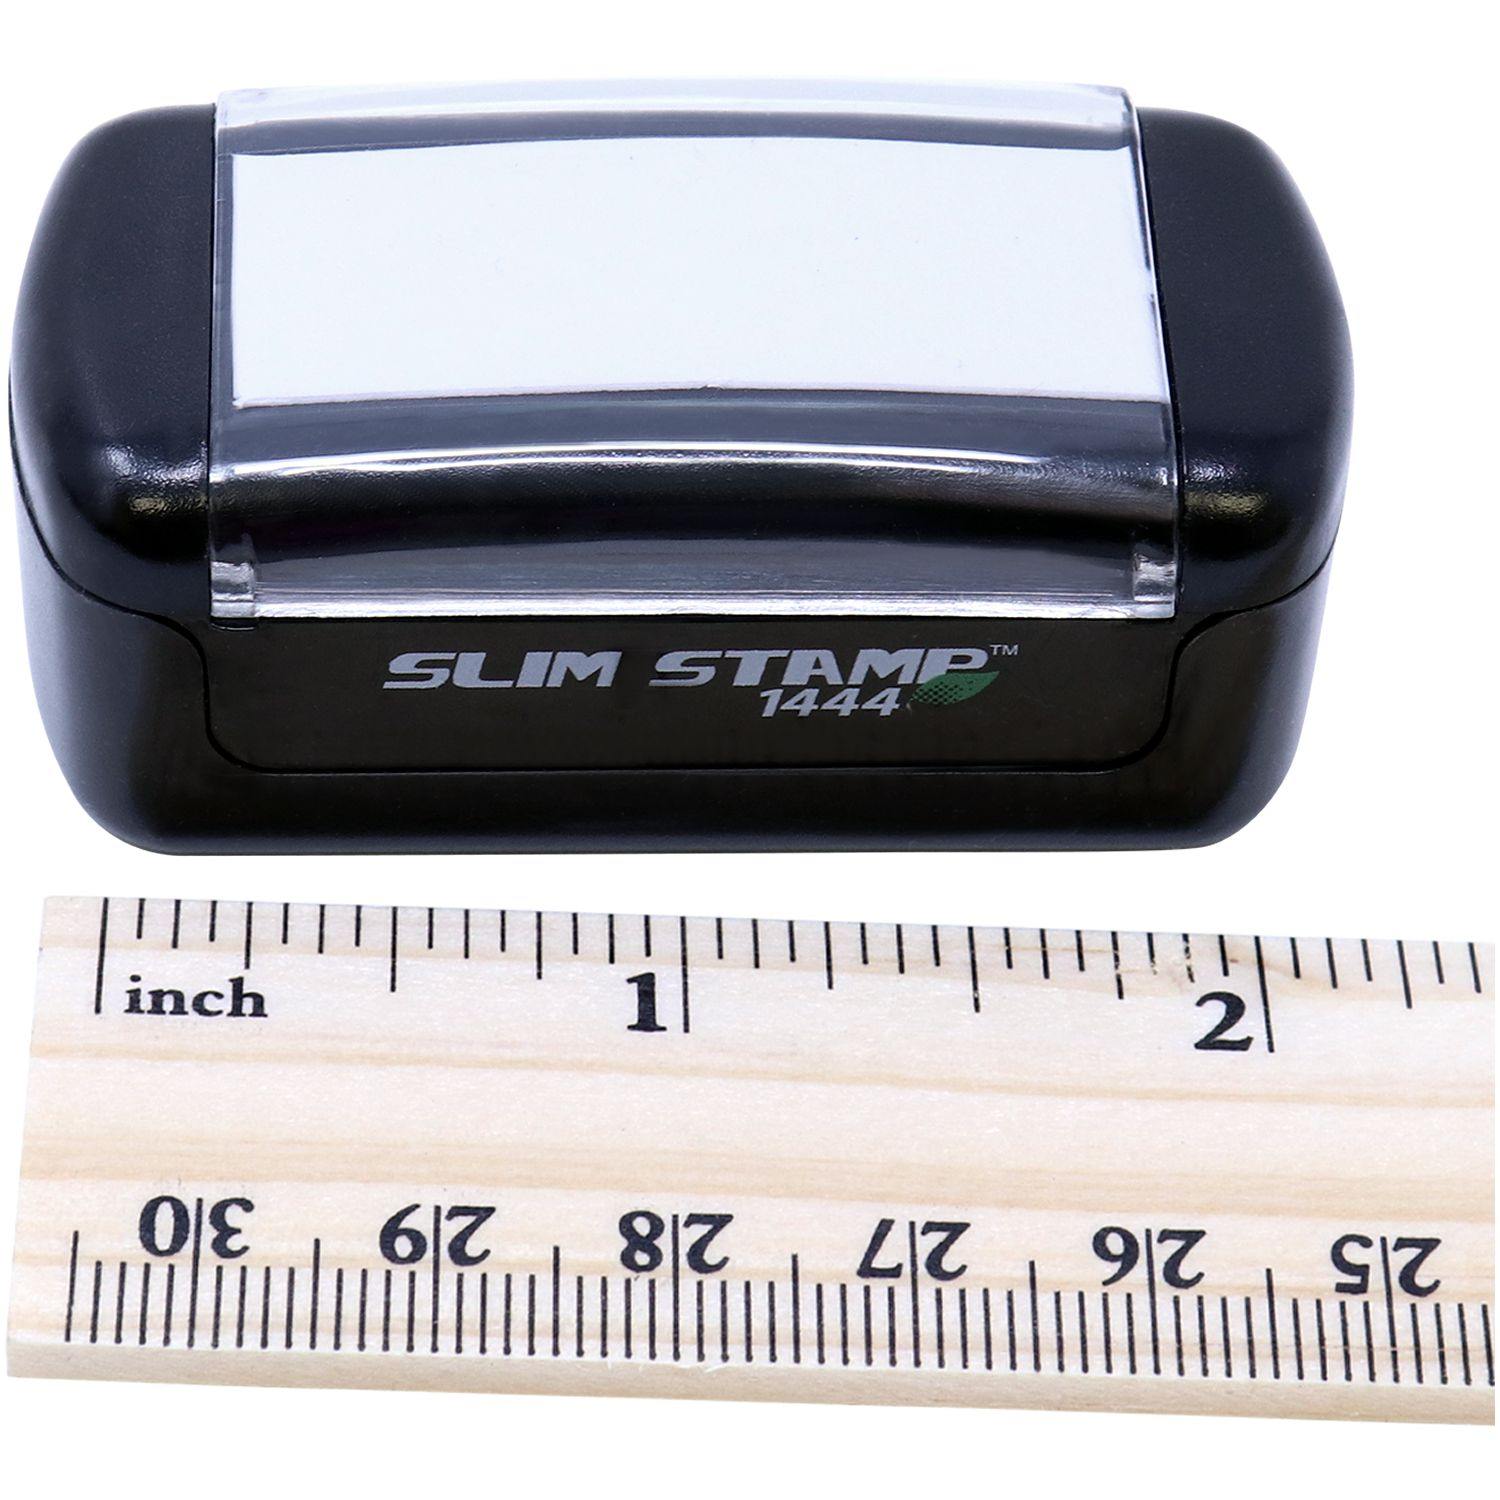 Measurement Slim Pre Inked Please Finish Stamp with Ruler